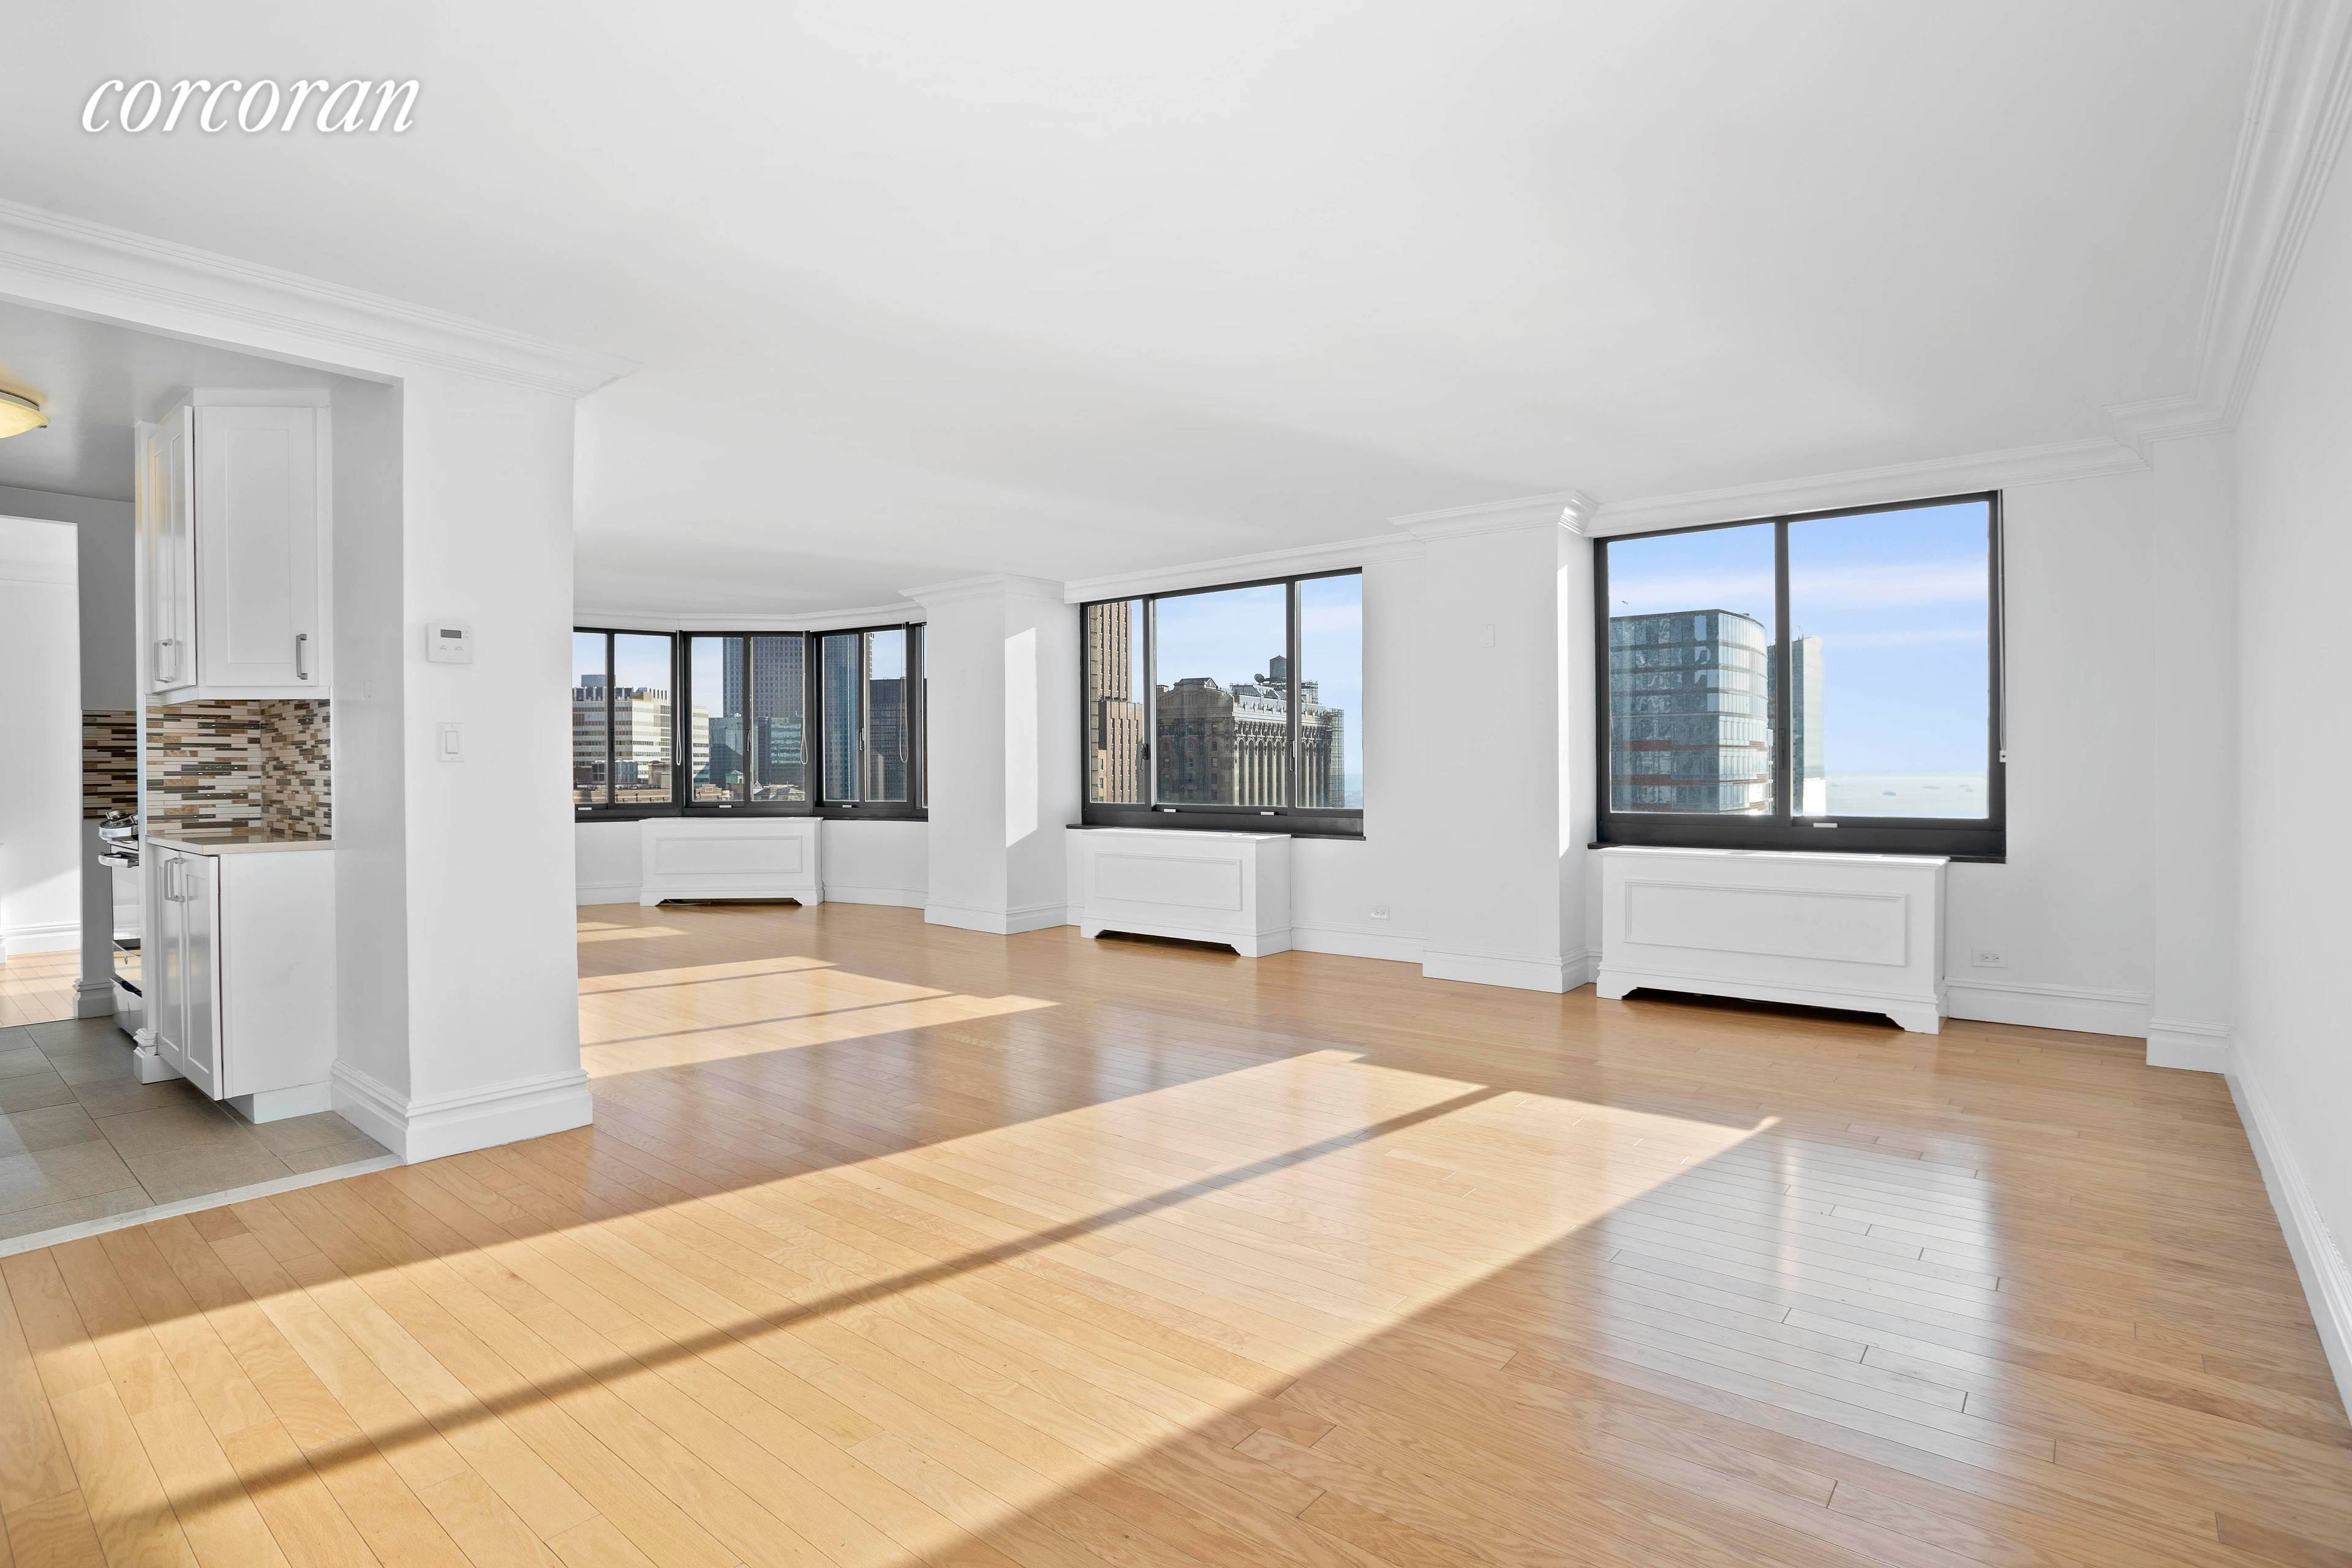 This SE facing 2BR 2. 5BA unit features a generously proportioned open concept living space and hardwood floors.